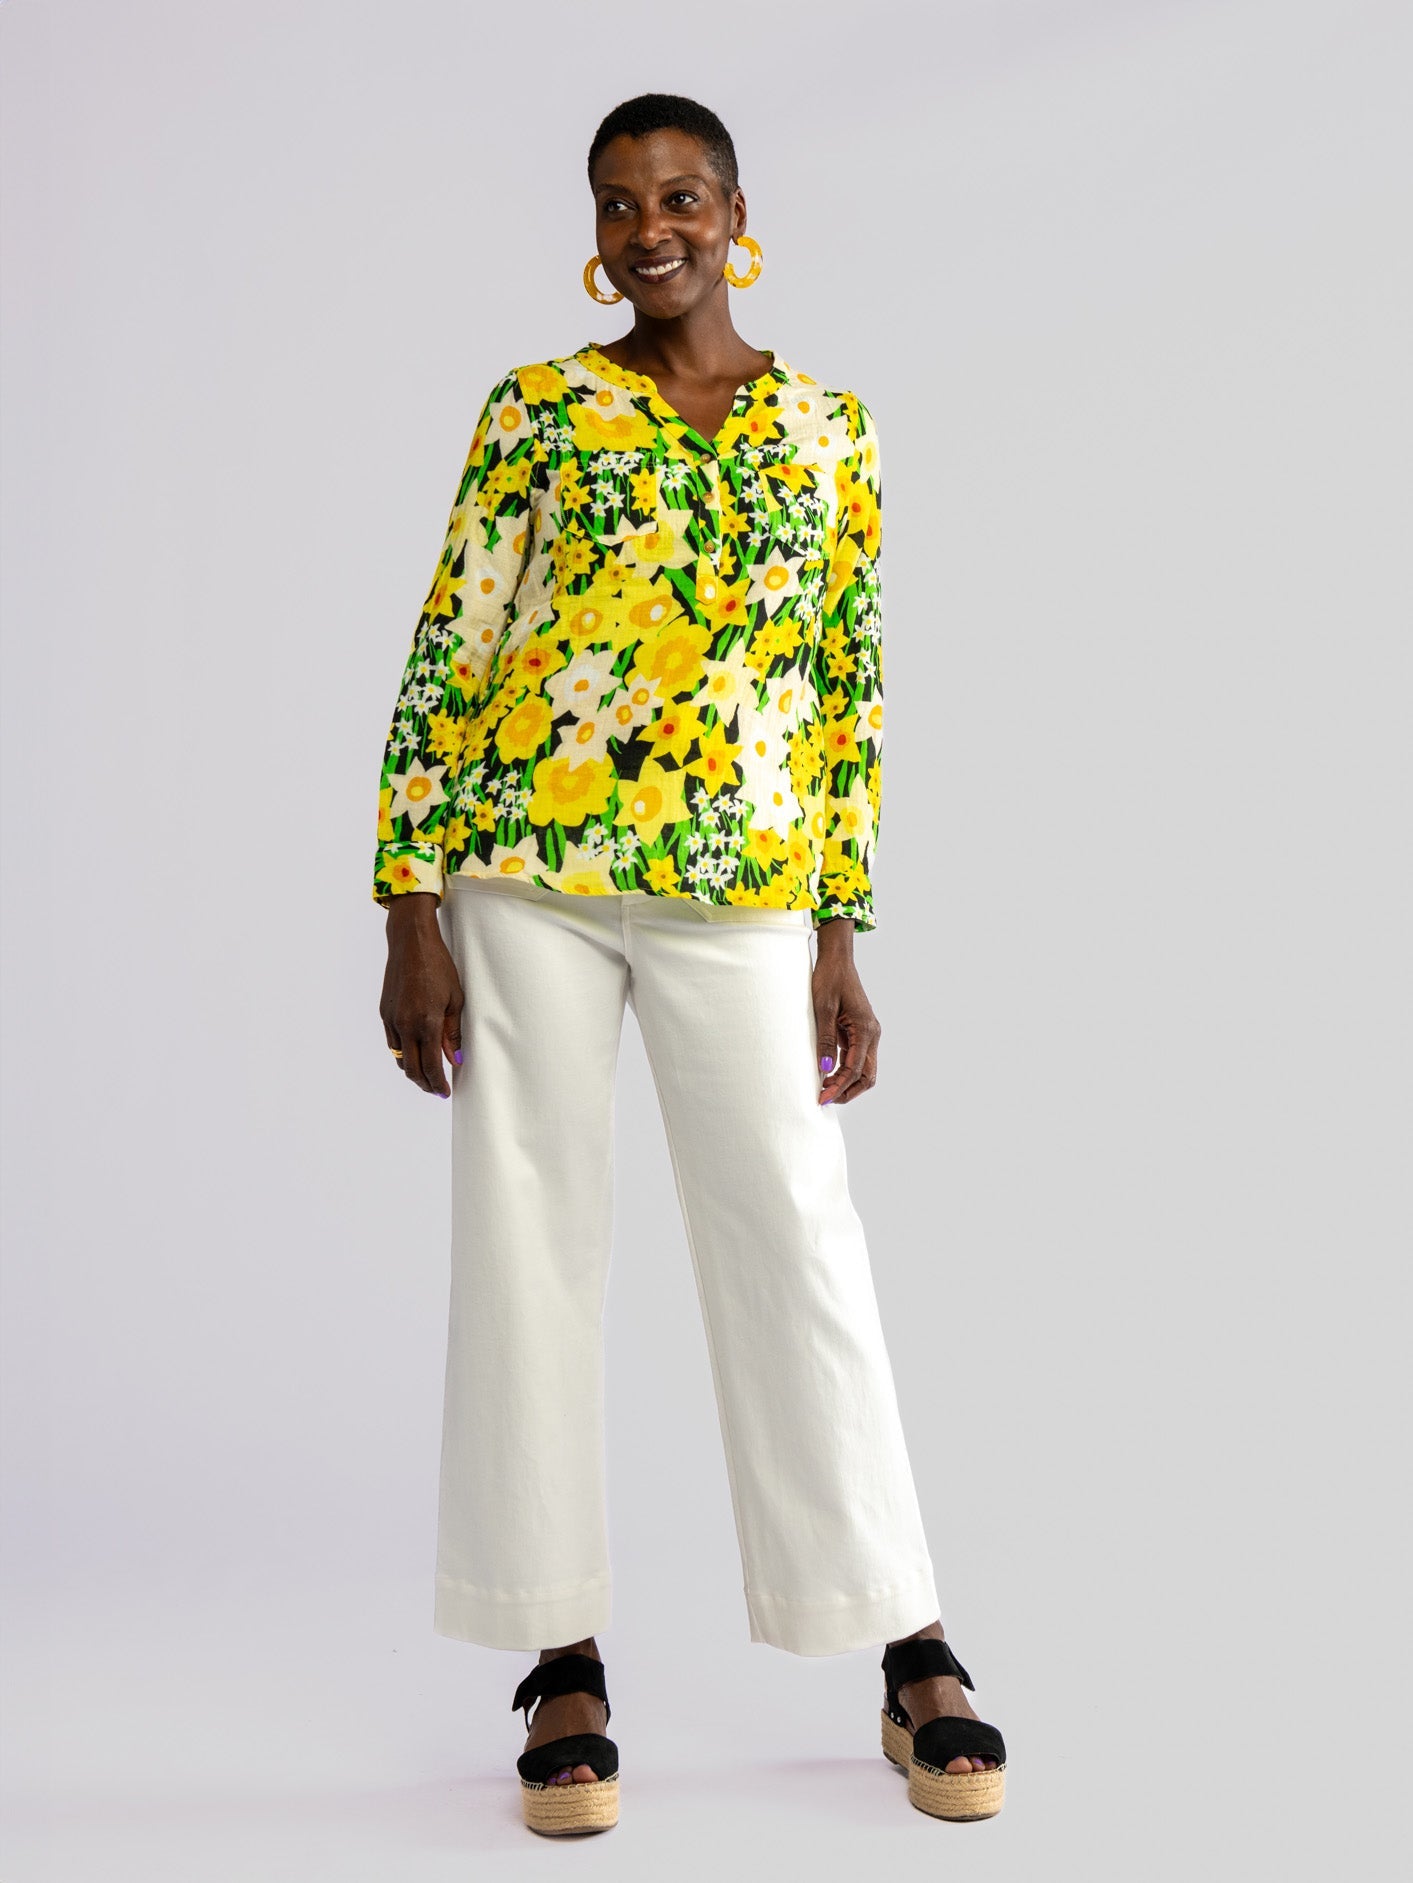 TERESA blouse Daffodils - Lesley Evers-Best Seller-Shop-Shop/All Products